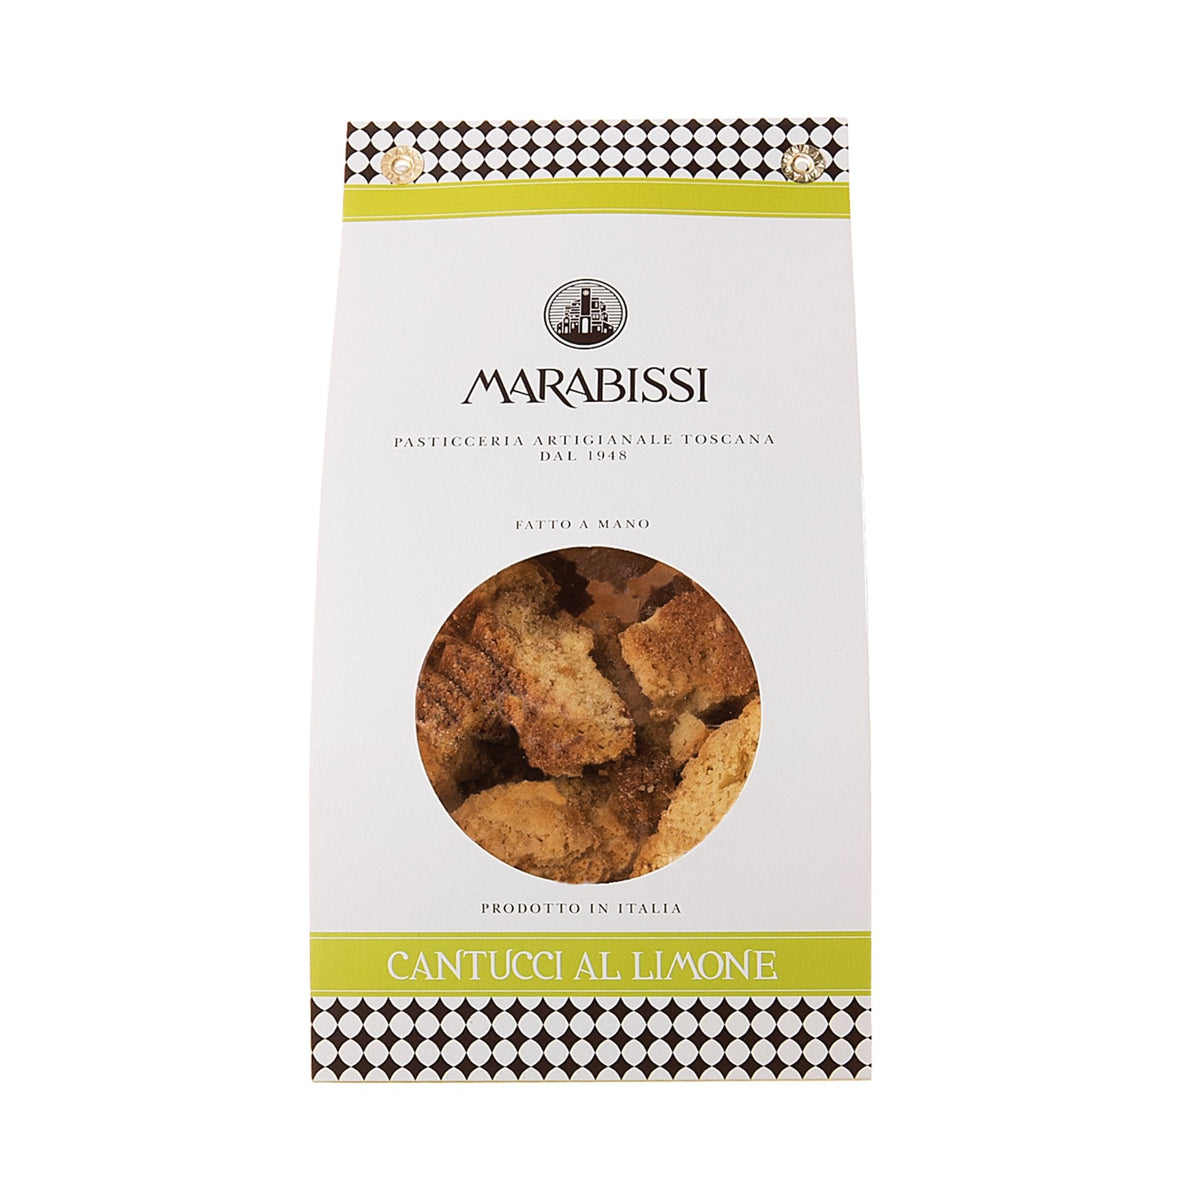 Marabissi Lemon Cantucci (White Bag) 200g  | Imported and distributed in the UK by Just Gourmet Foods